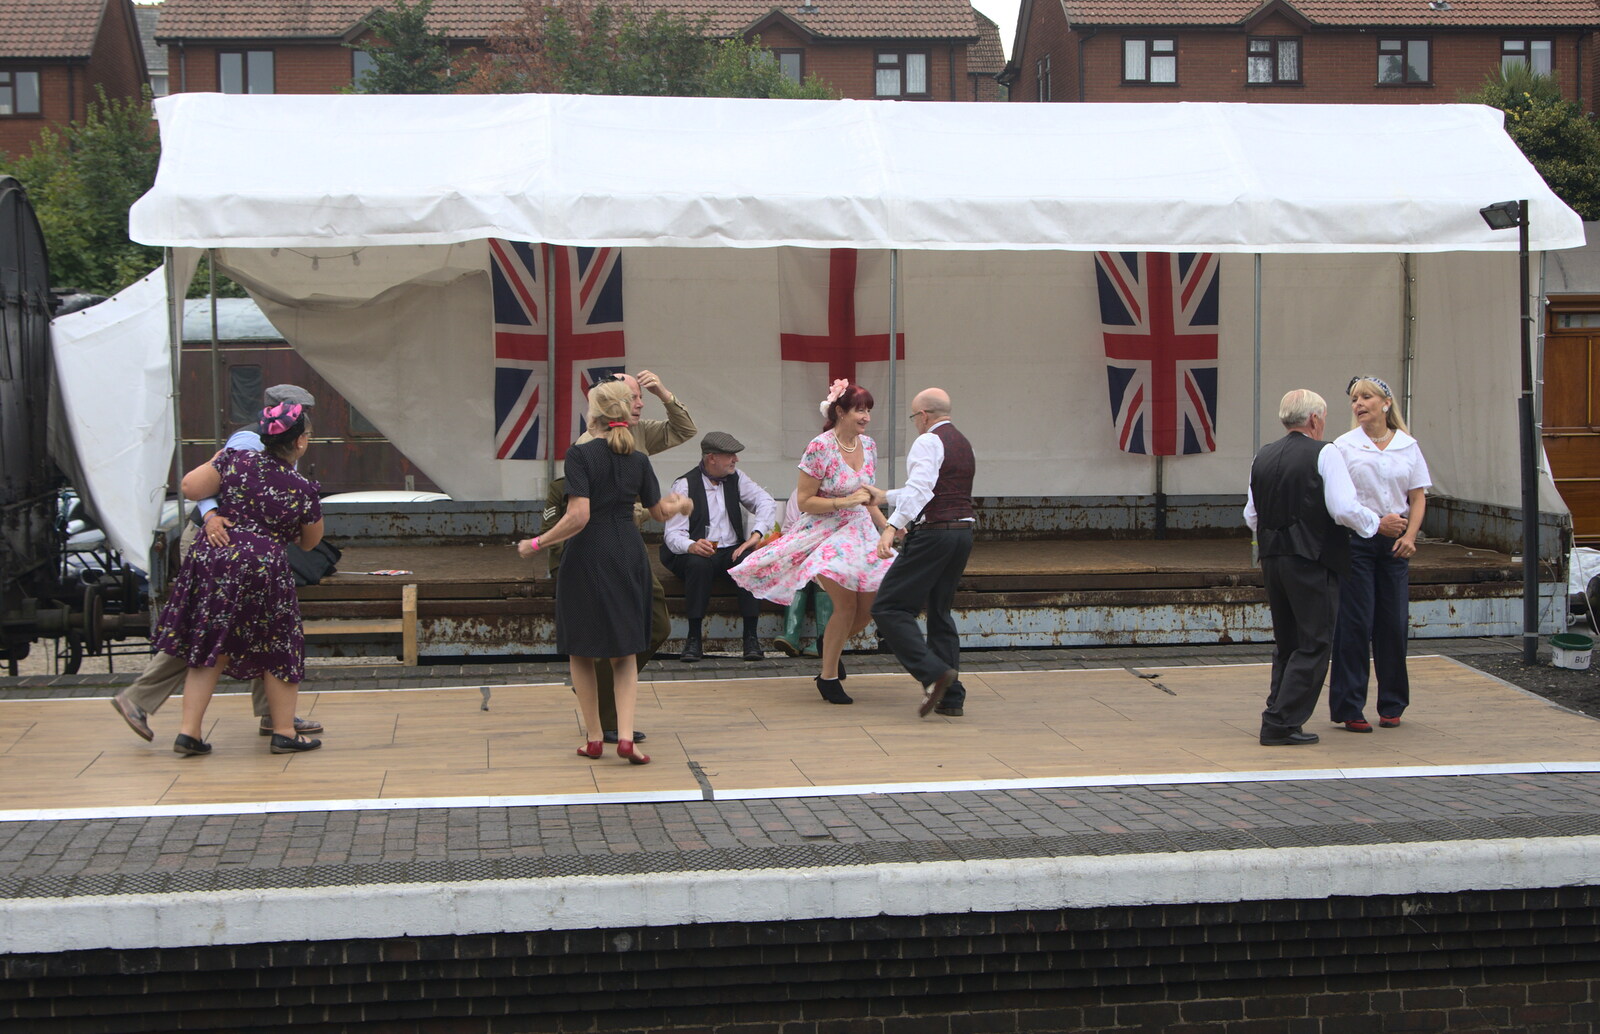 Some jitterbuggers on Platform 1 at Sheringham from A Steamy 1940s Day Out, Holt and Sheringham, Norfolk - 20th September 2015